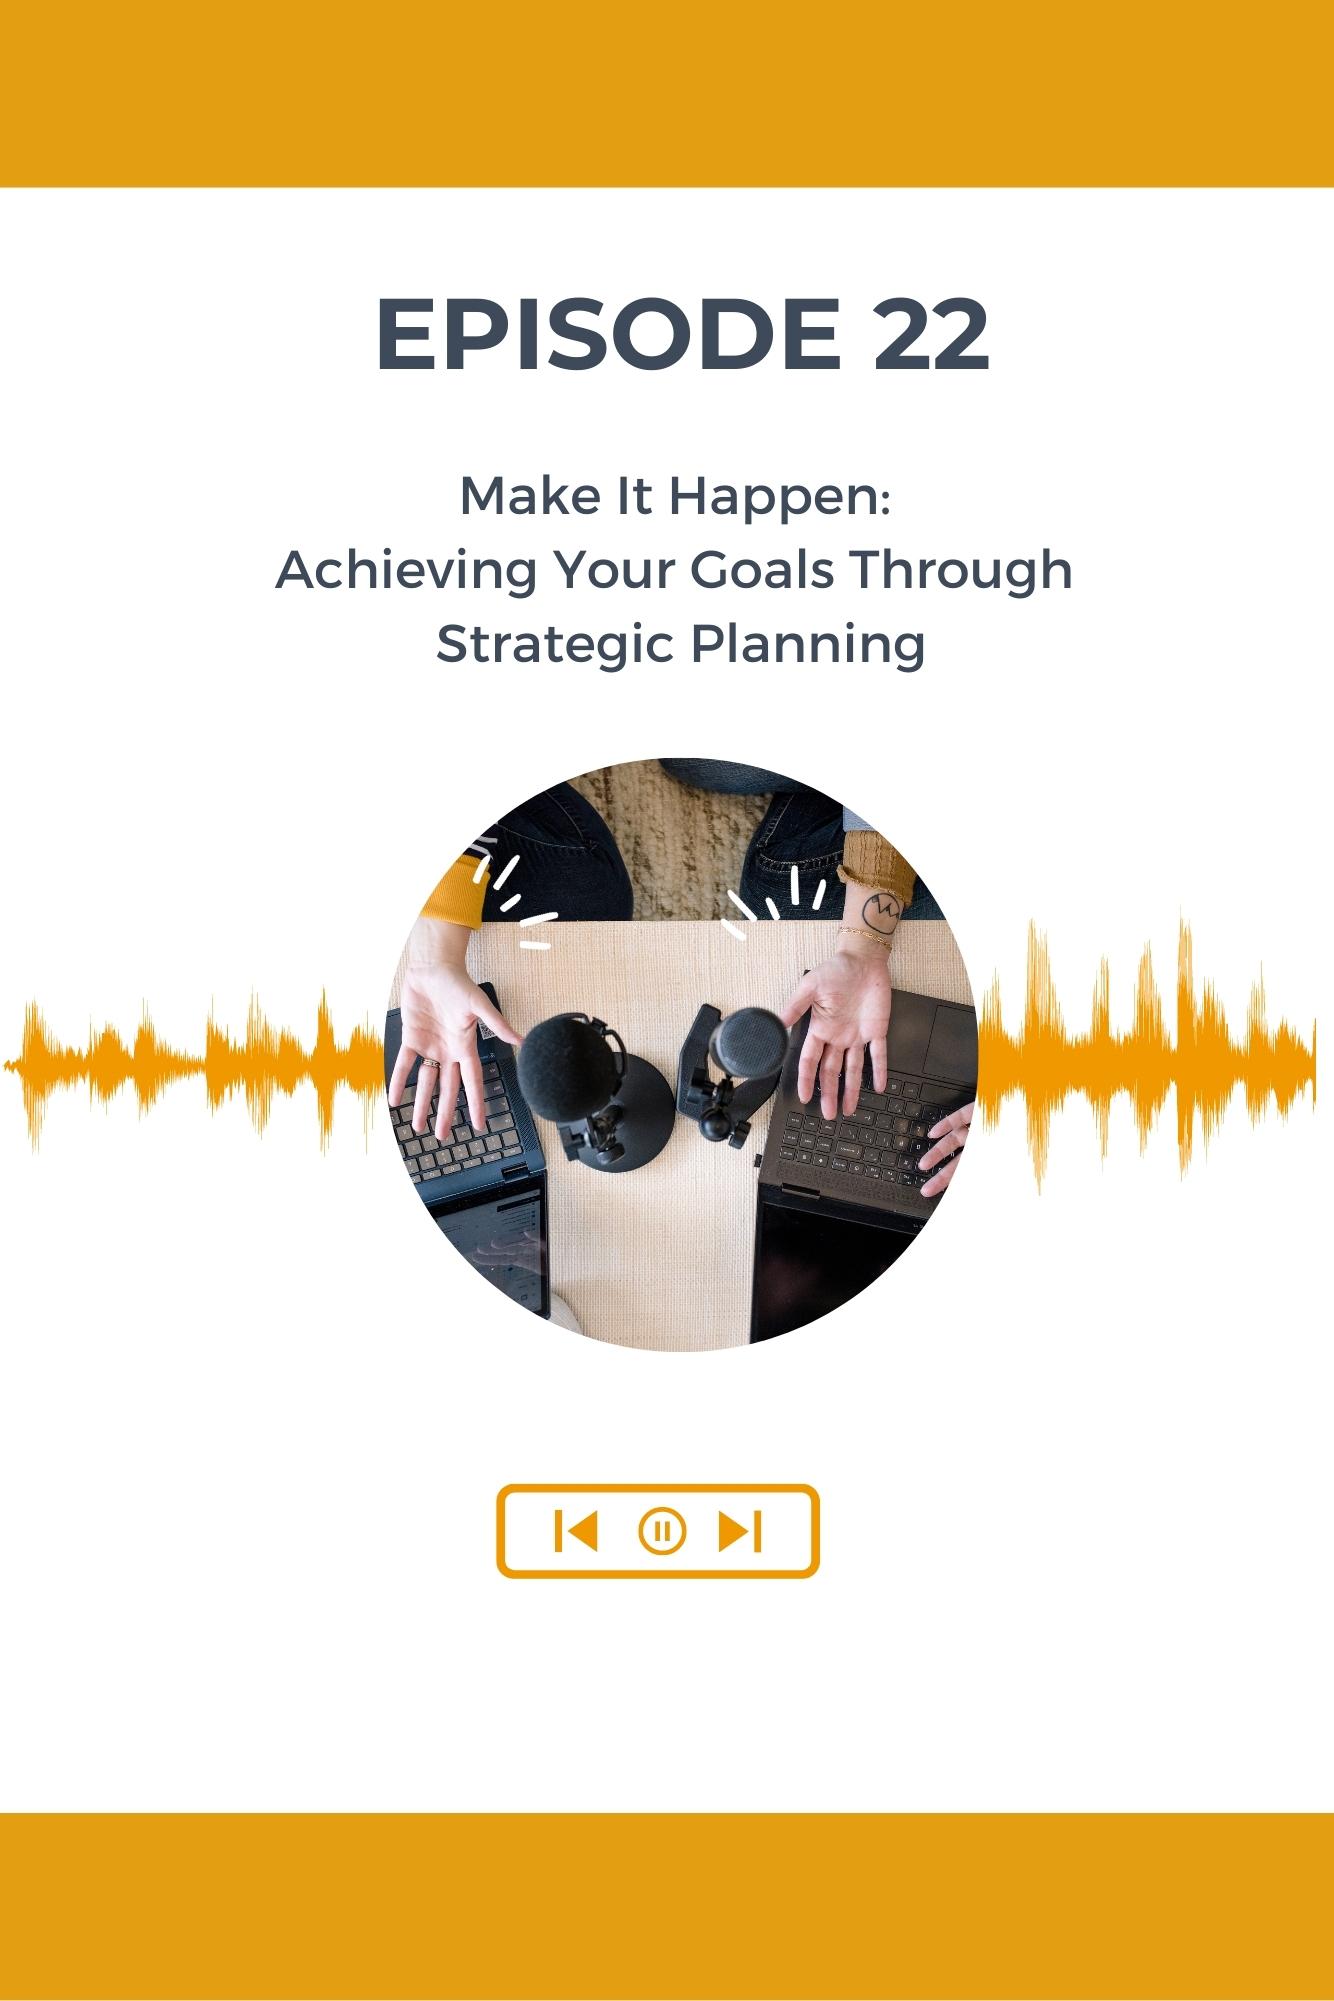 A white podcast graphic for a christian womens business podcast with yellow accents and the words Make it Happen, Achieving your goals through strategic planning.